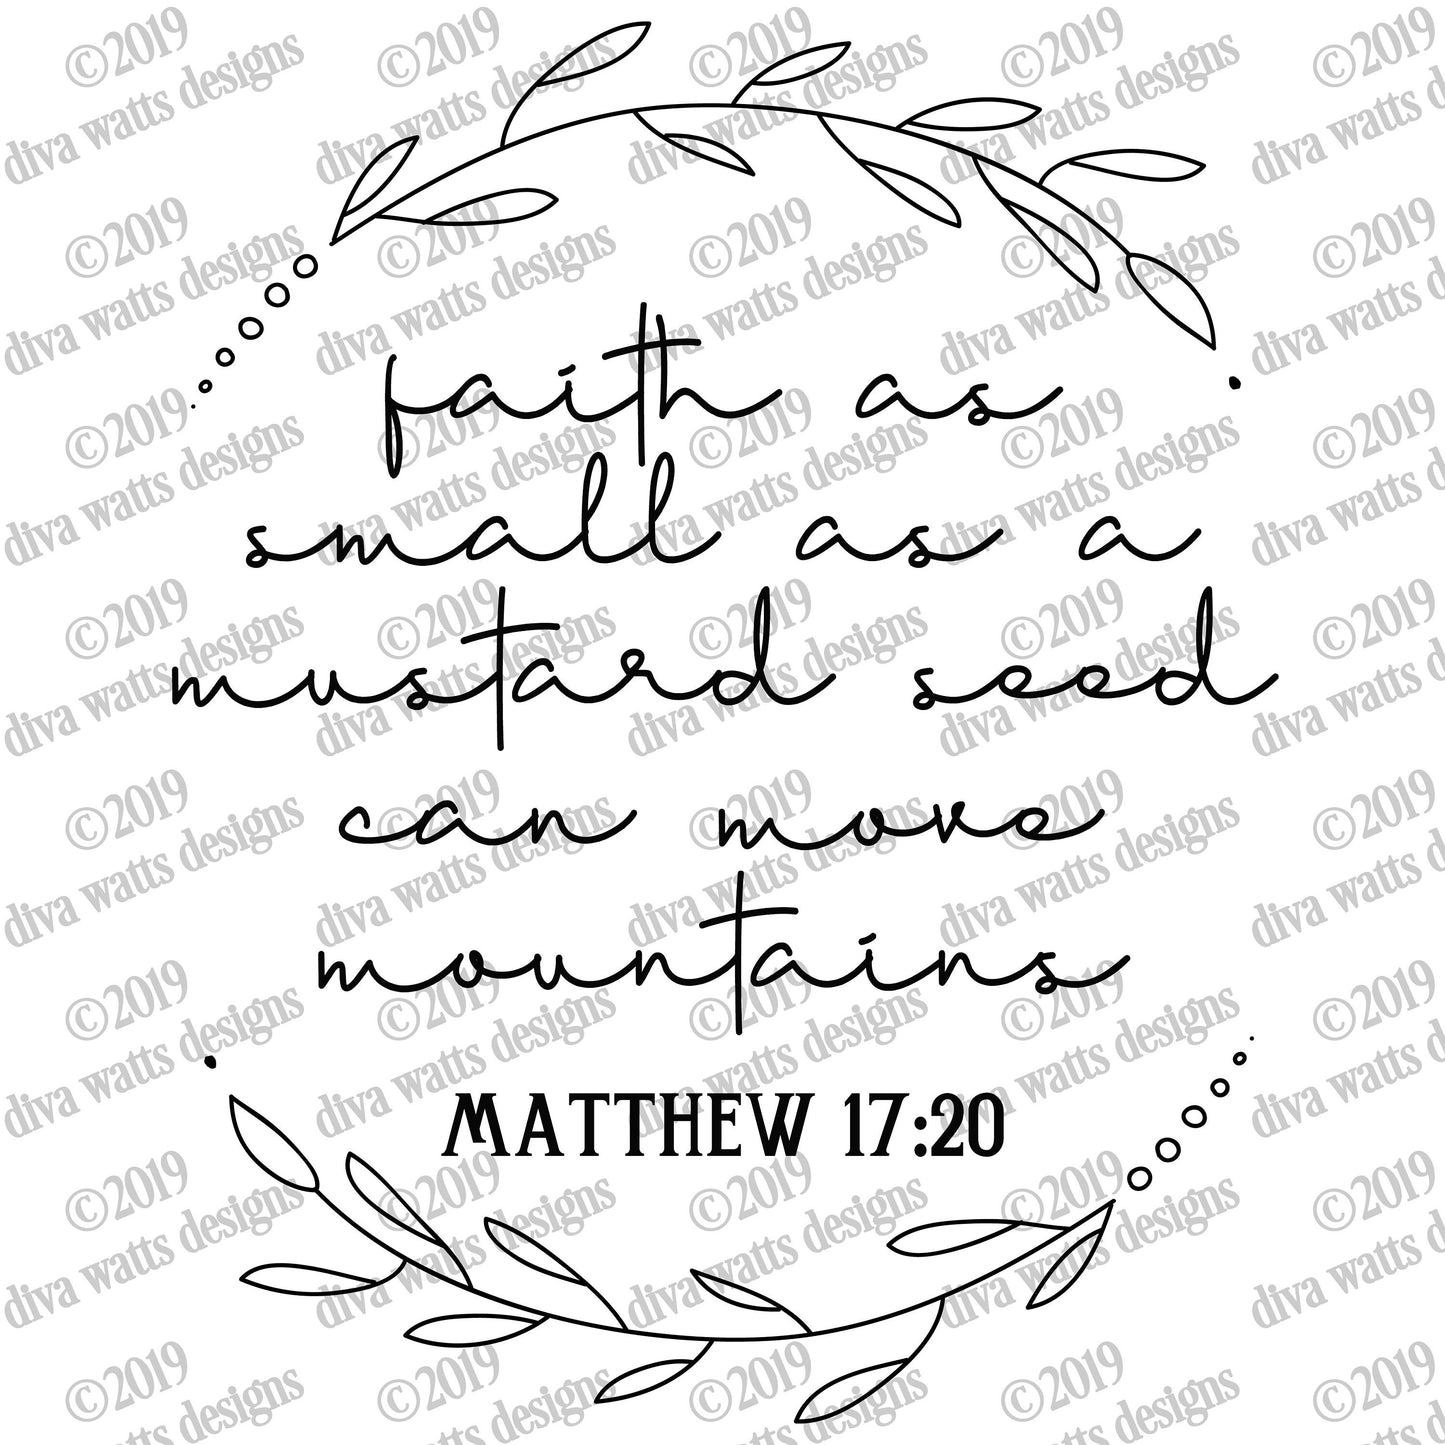 SVG Faith as Small as a Mustard Seed Can Move Mountains Matthew 17:20 | Cutting File | DXF PNG eps | Christian Bible Verse | Farmhouse Sign